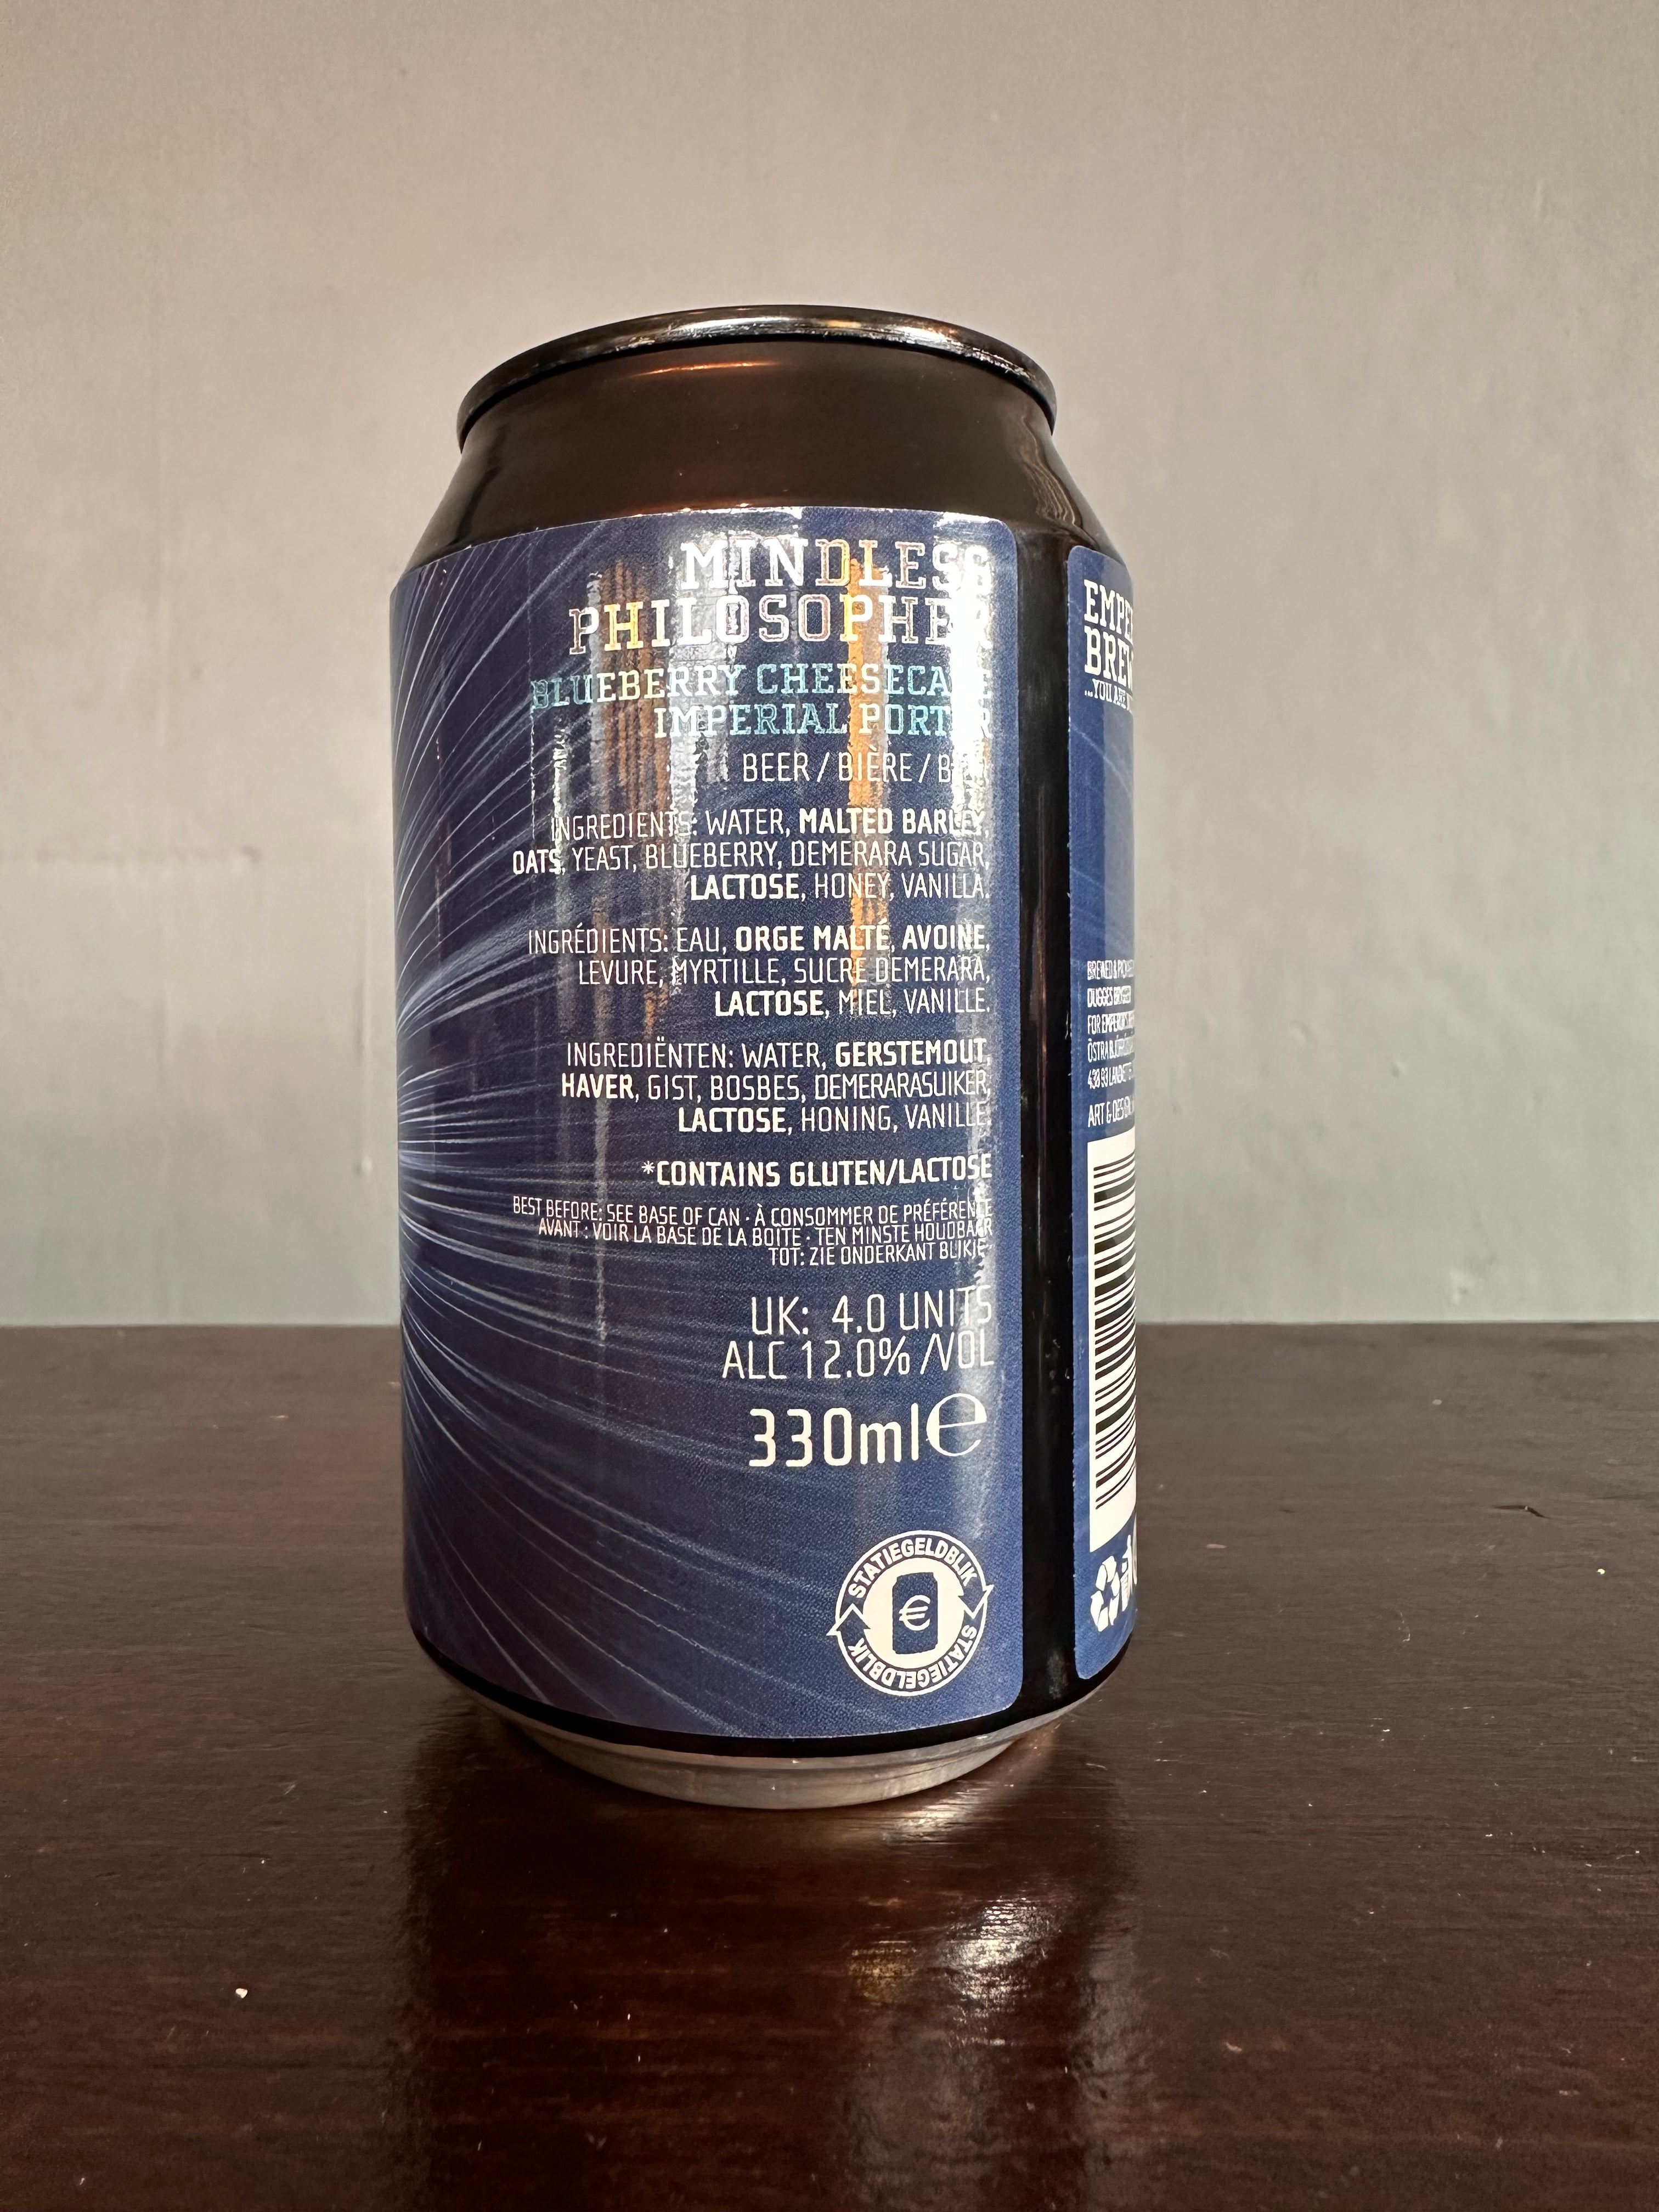 Emperor’s Mindless Philosopher Blueberry Cheesecake Imperial Porter